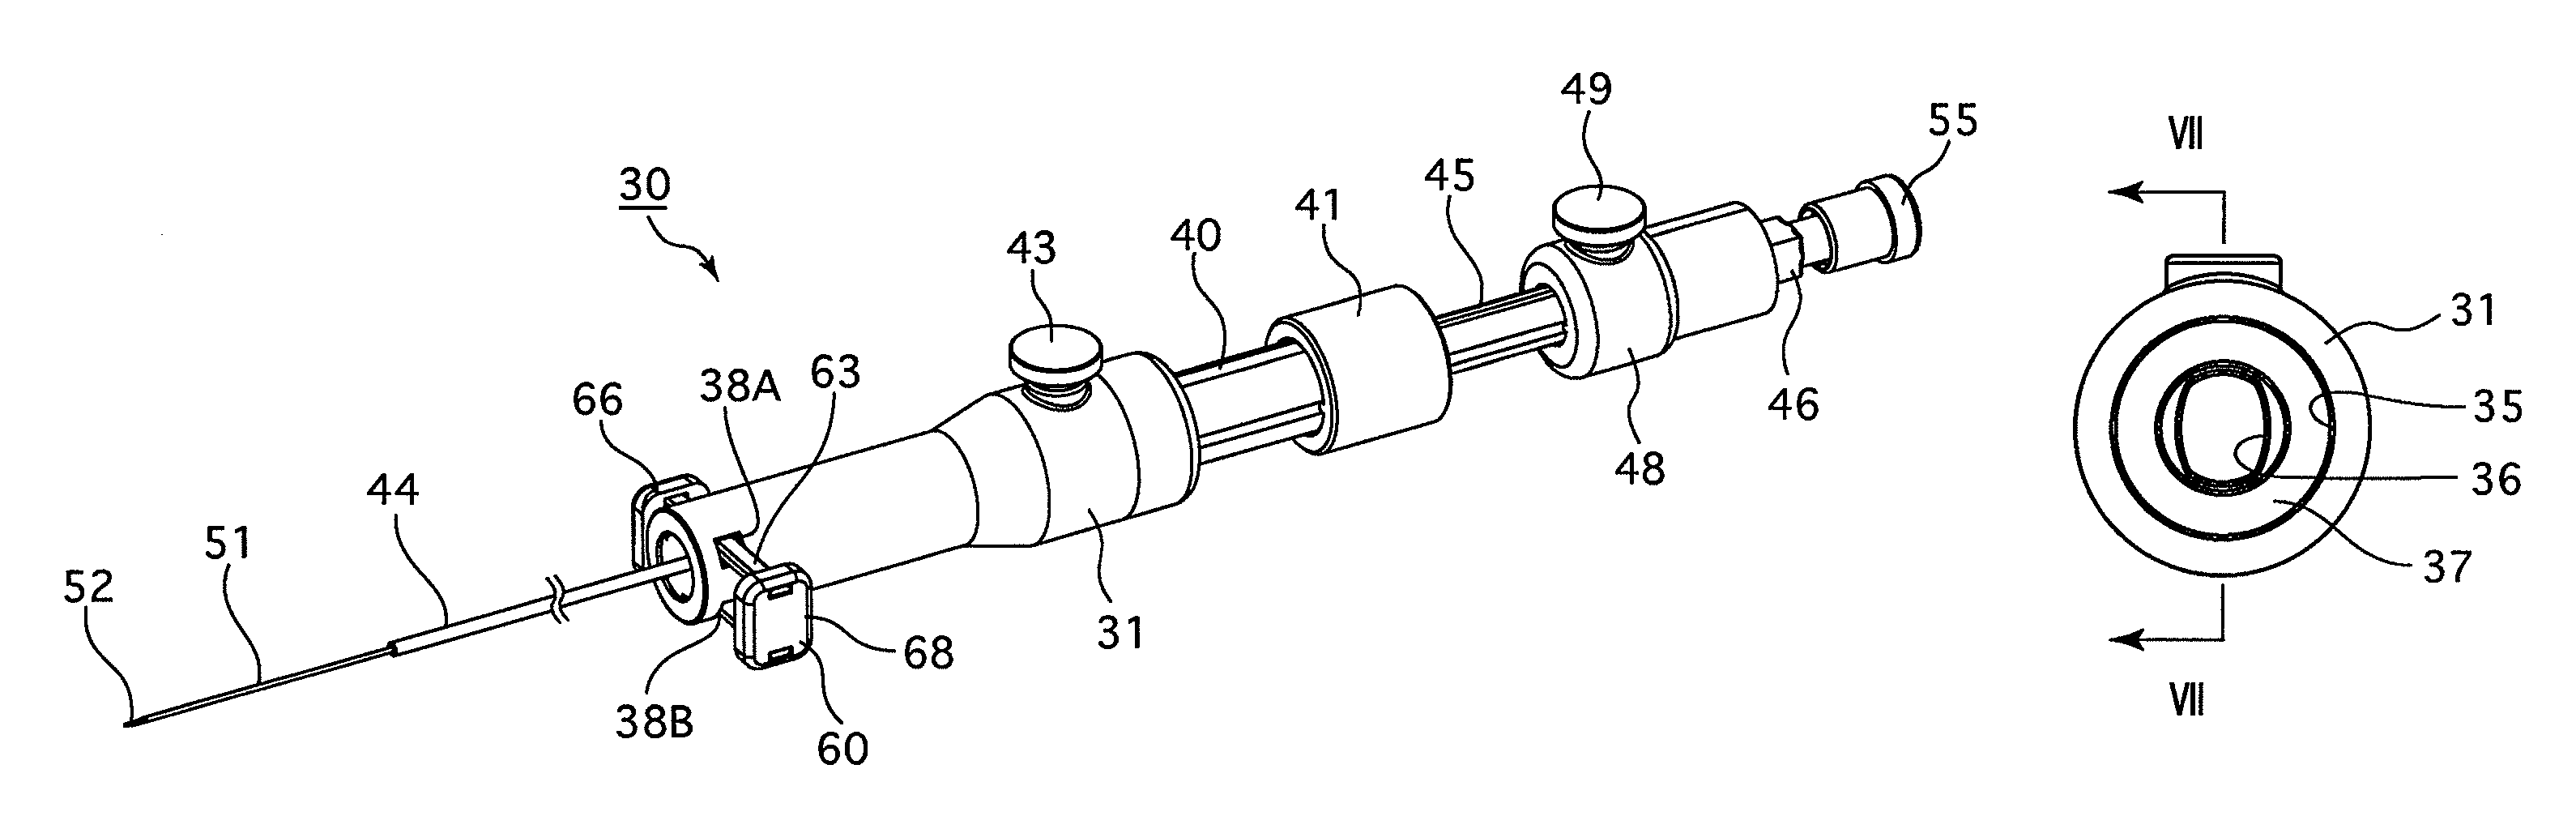 Puncture needle device for ultrasonic endoscope